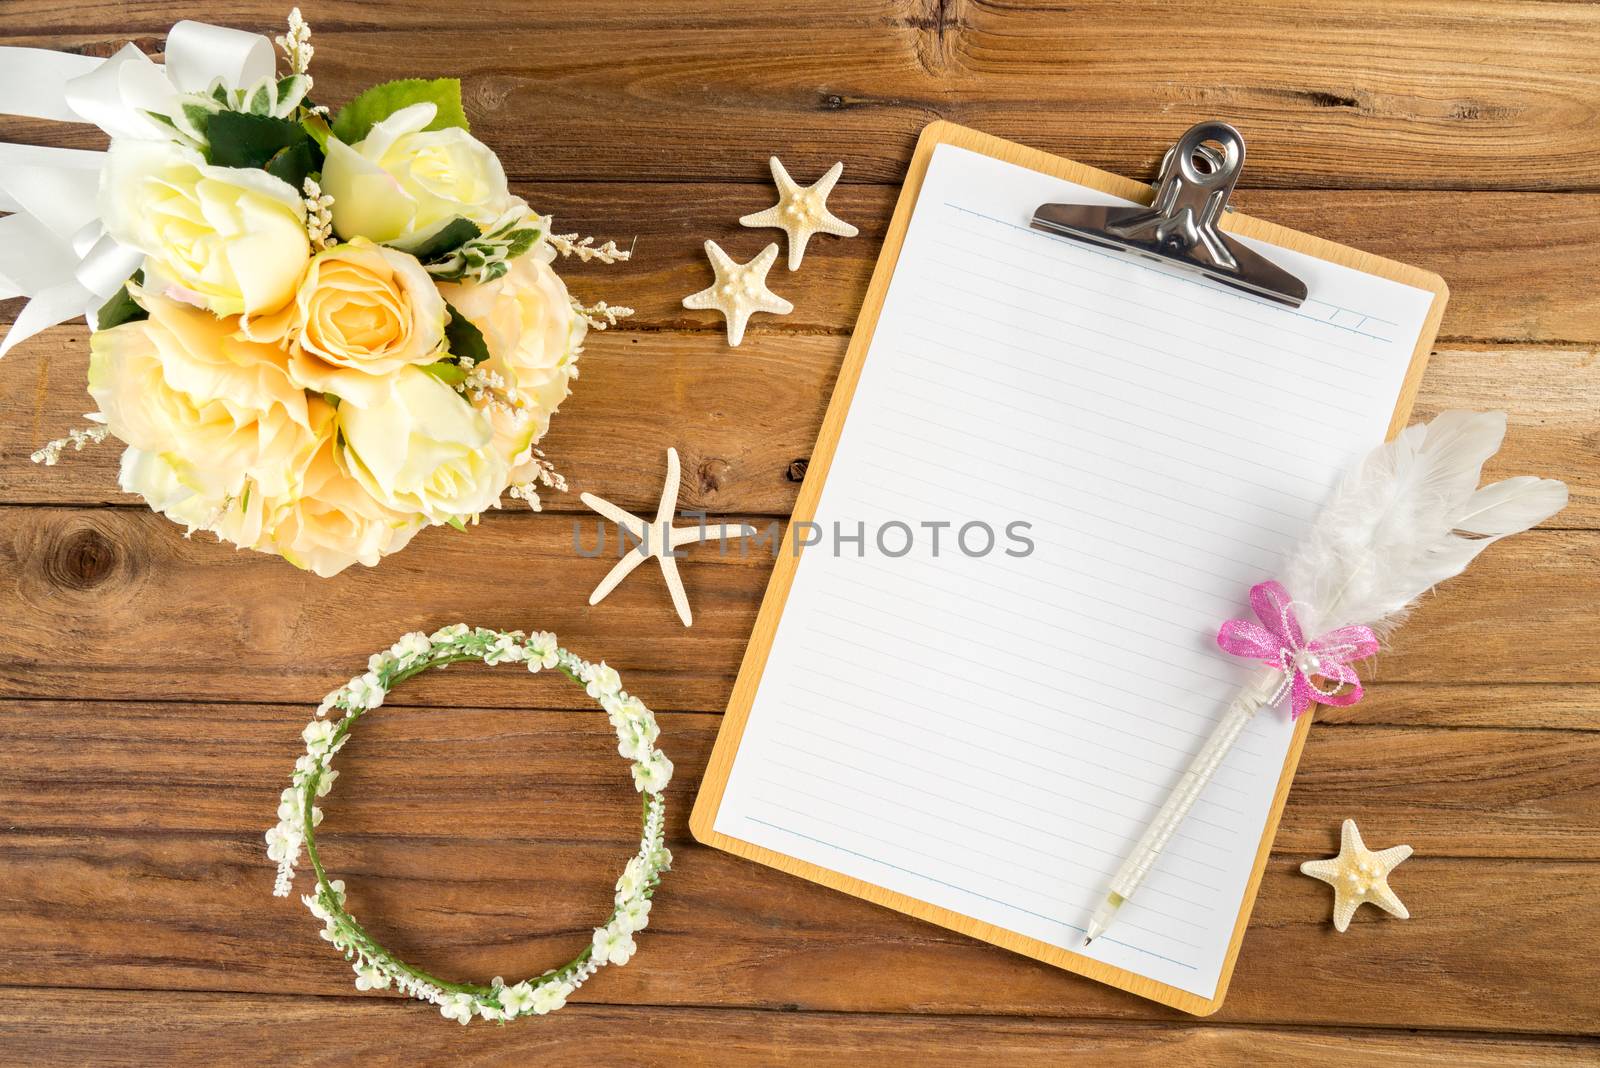 Wooden Clipboard attach planning paper with pen on top beside rose headband, tiara, bouquet, starfish